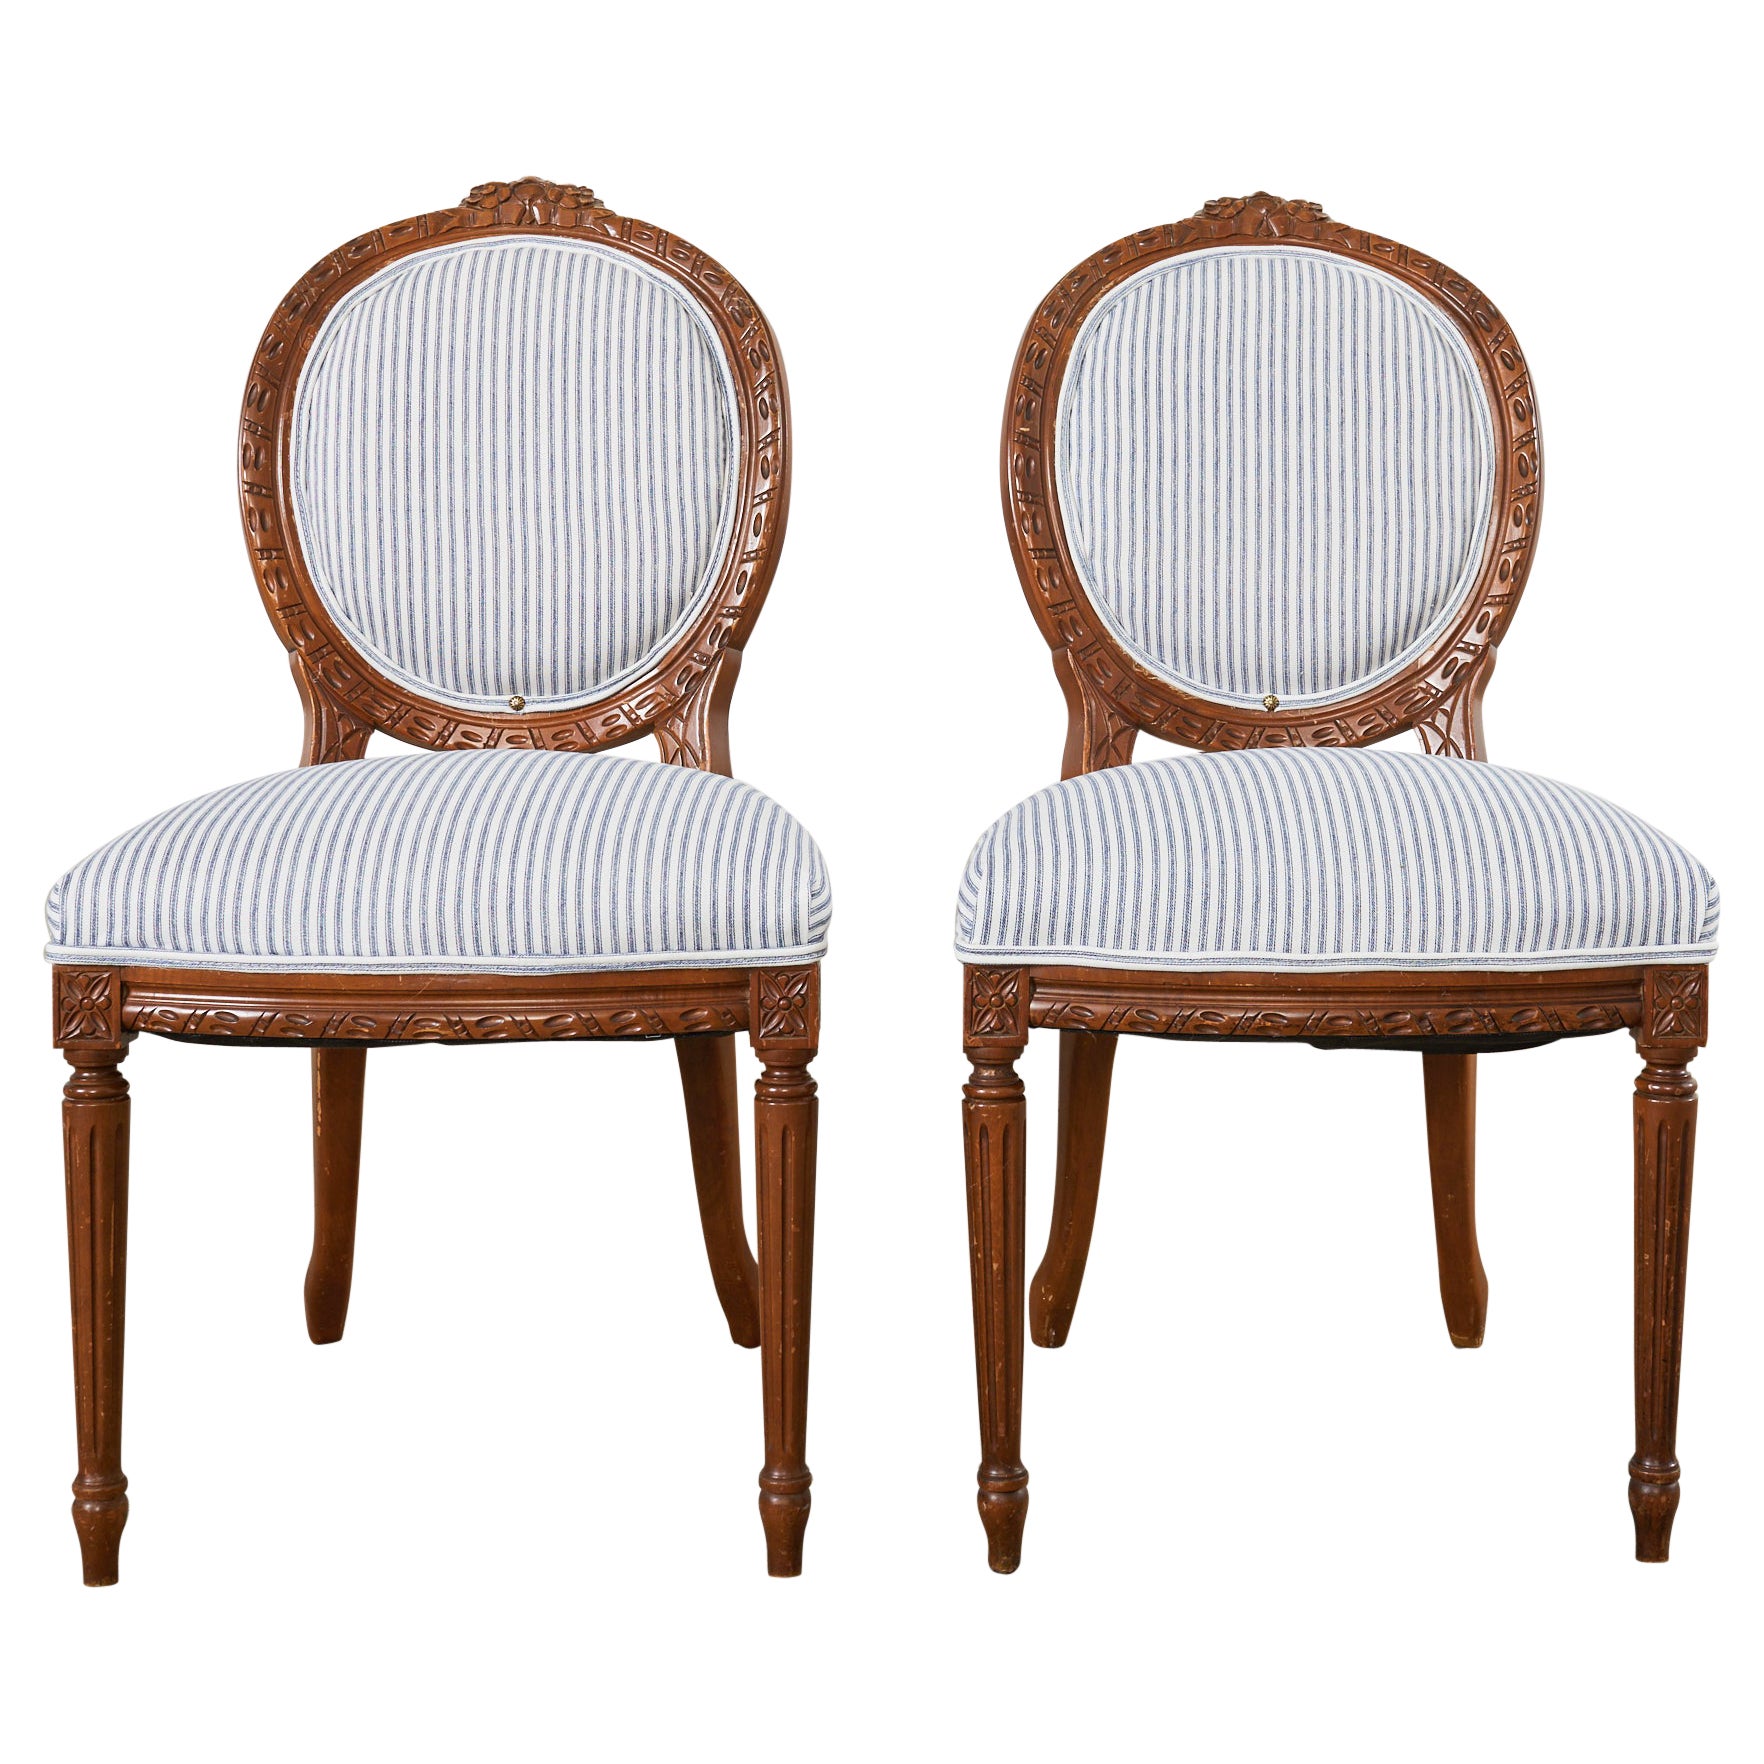 Pair of Louis XVI Style Balloon Back Dining Chairs